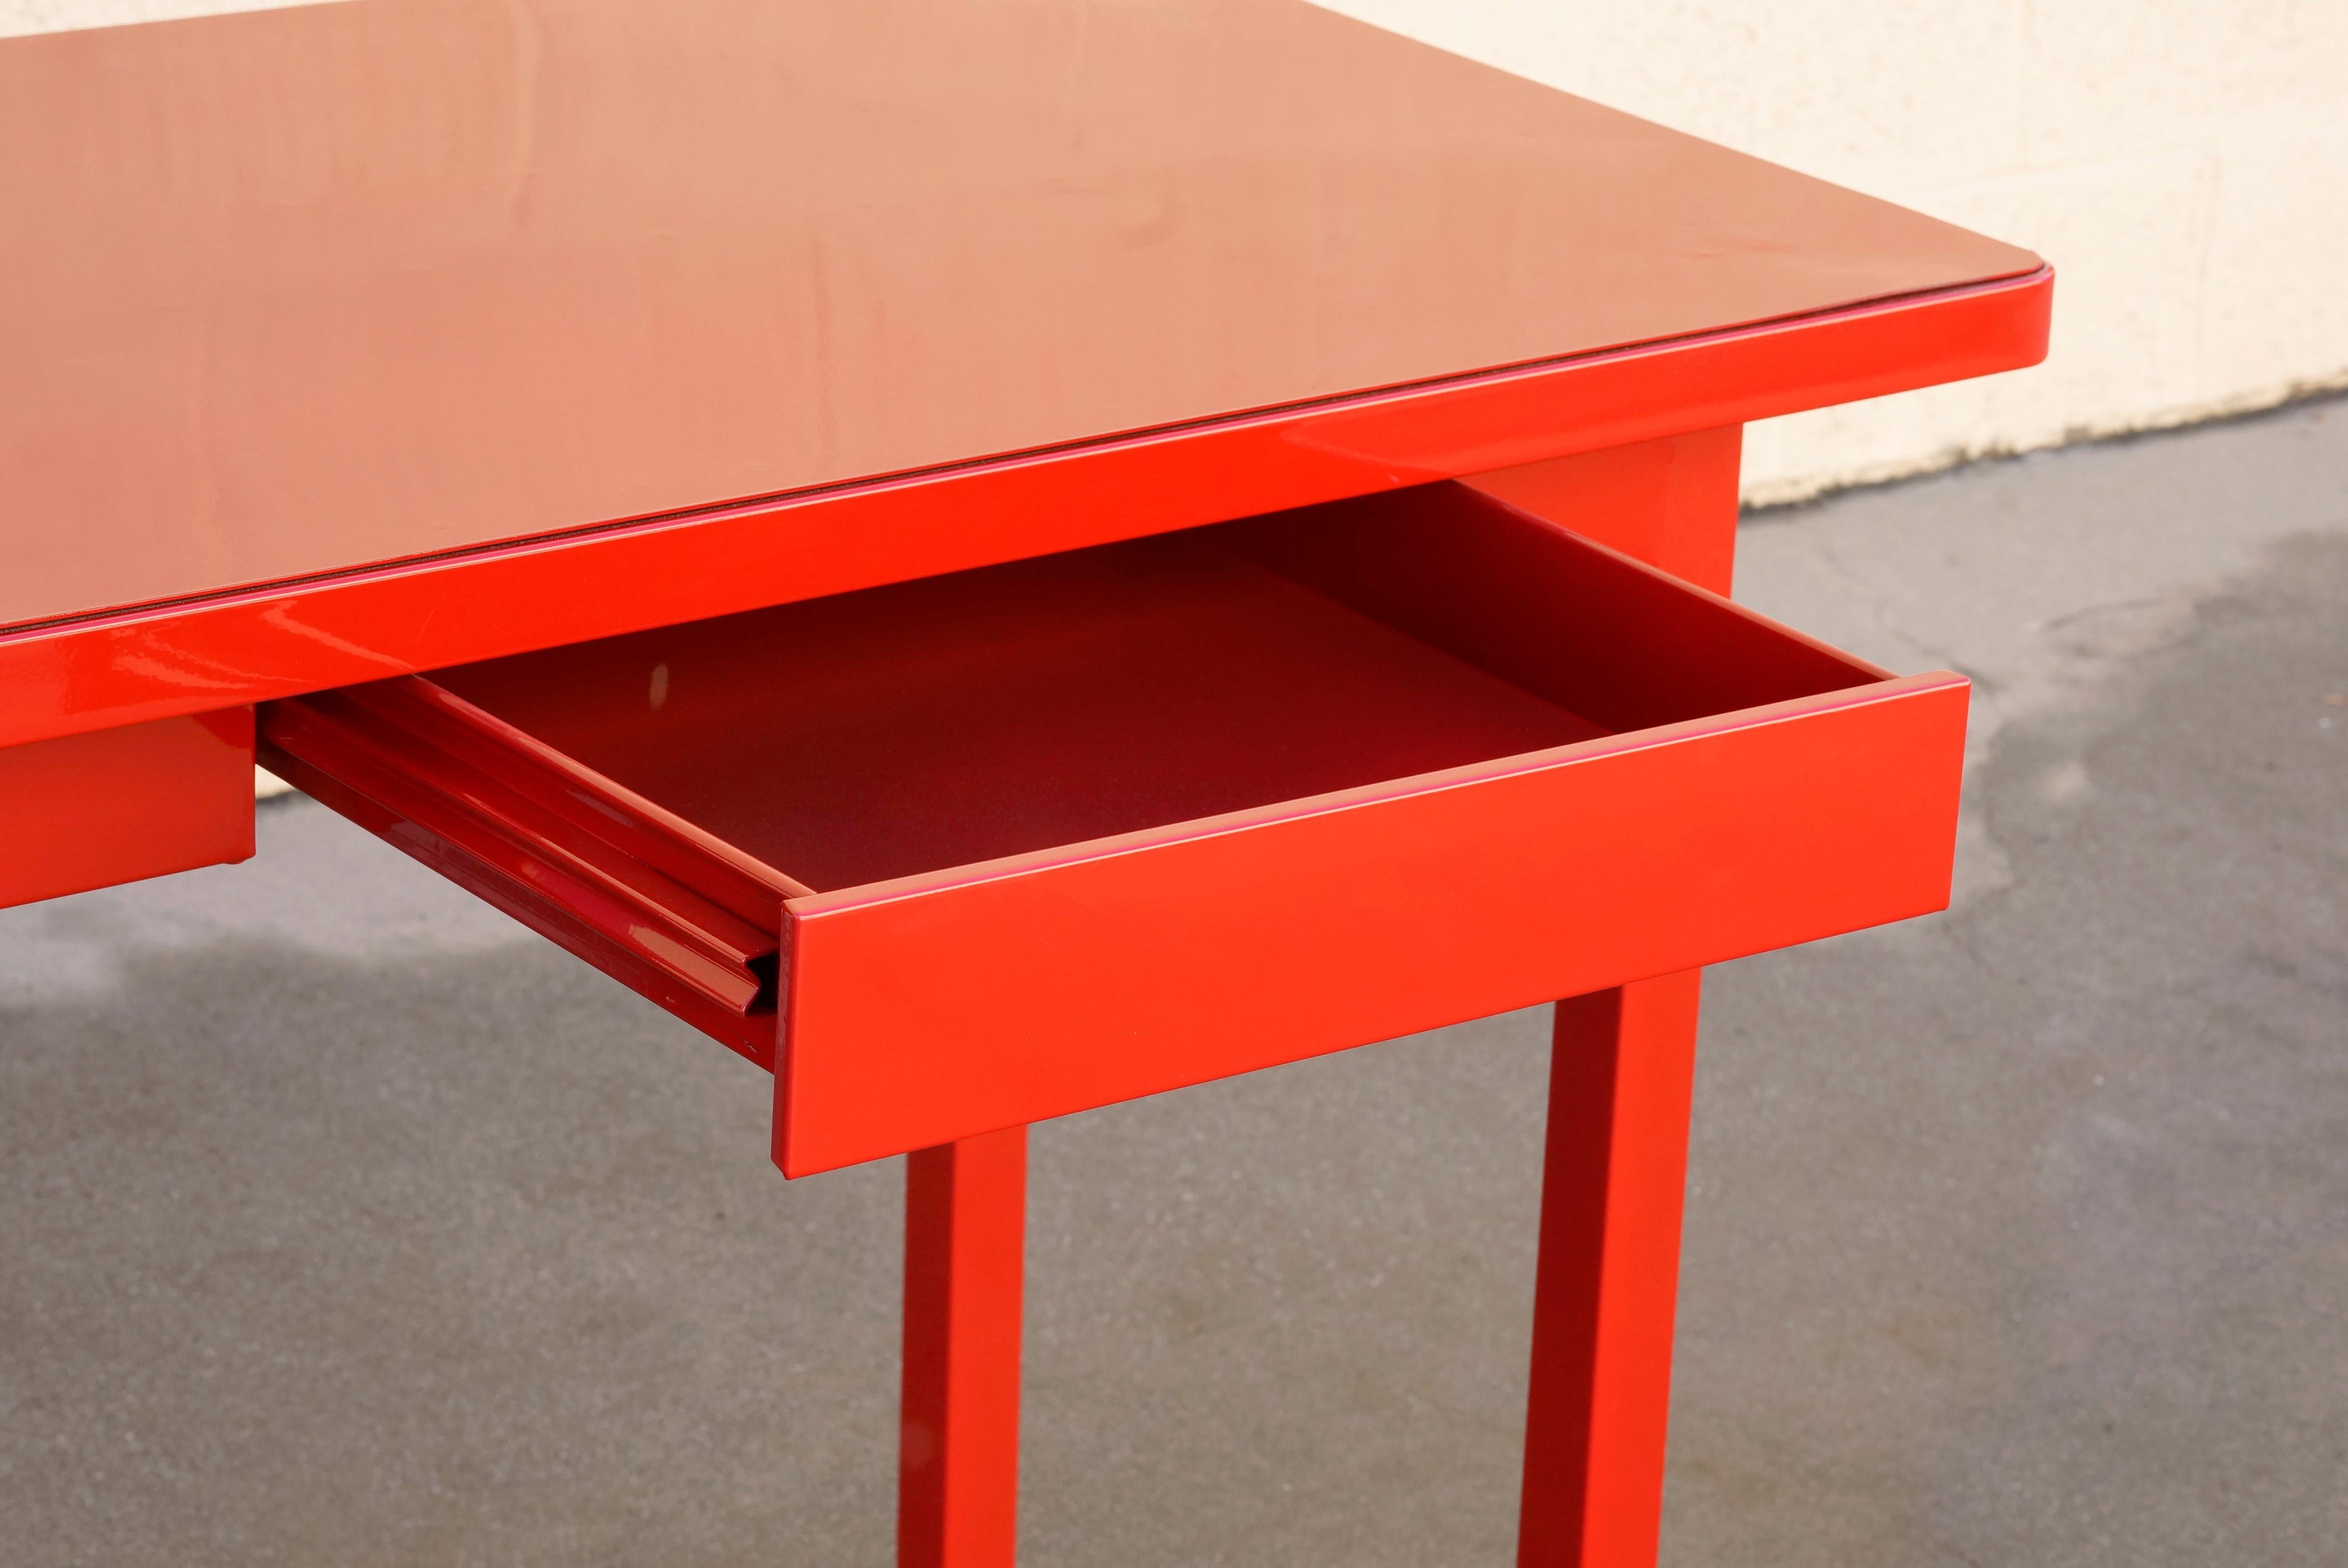 Midcentury four-legged tanker table with drawer, circa 1940s. This unique 